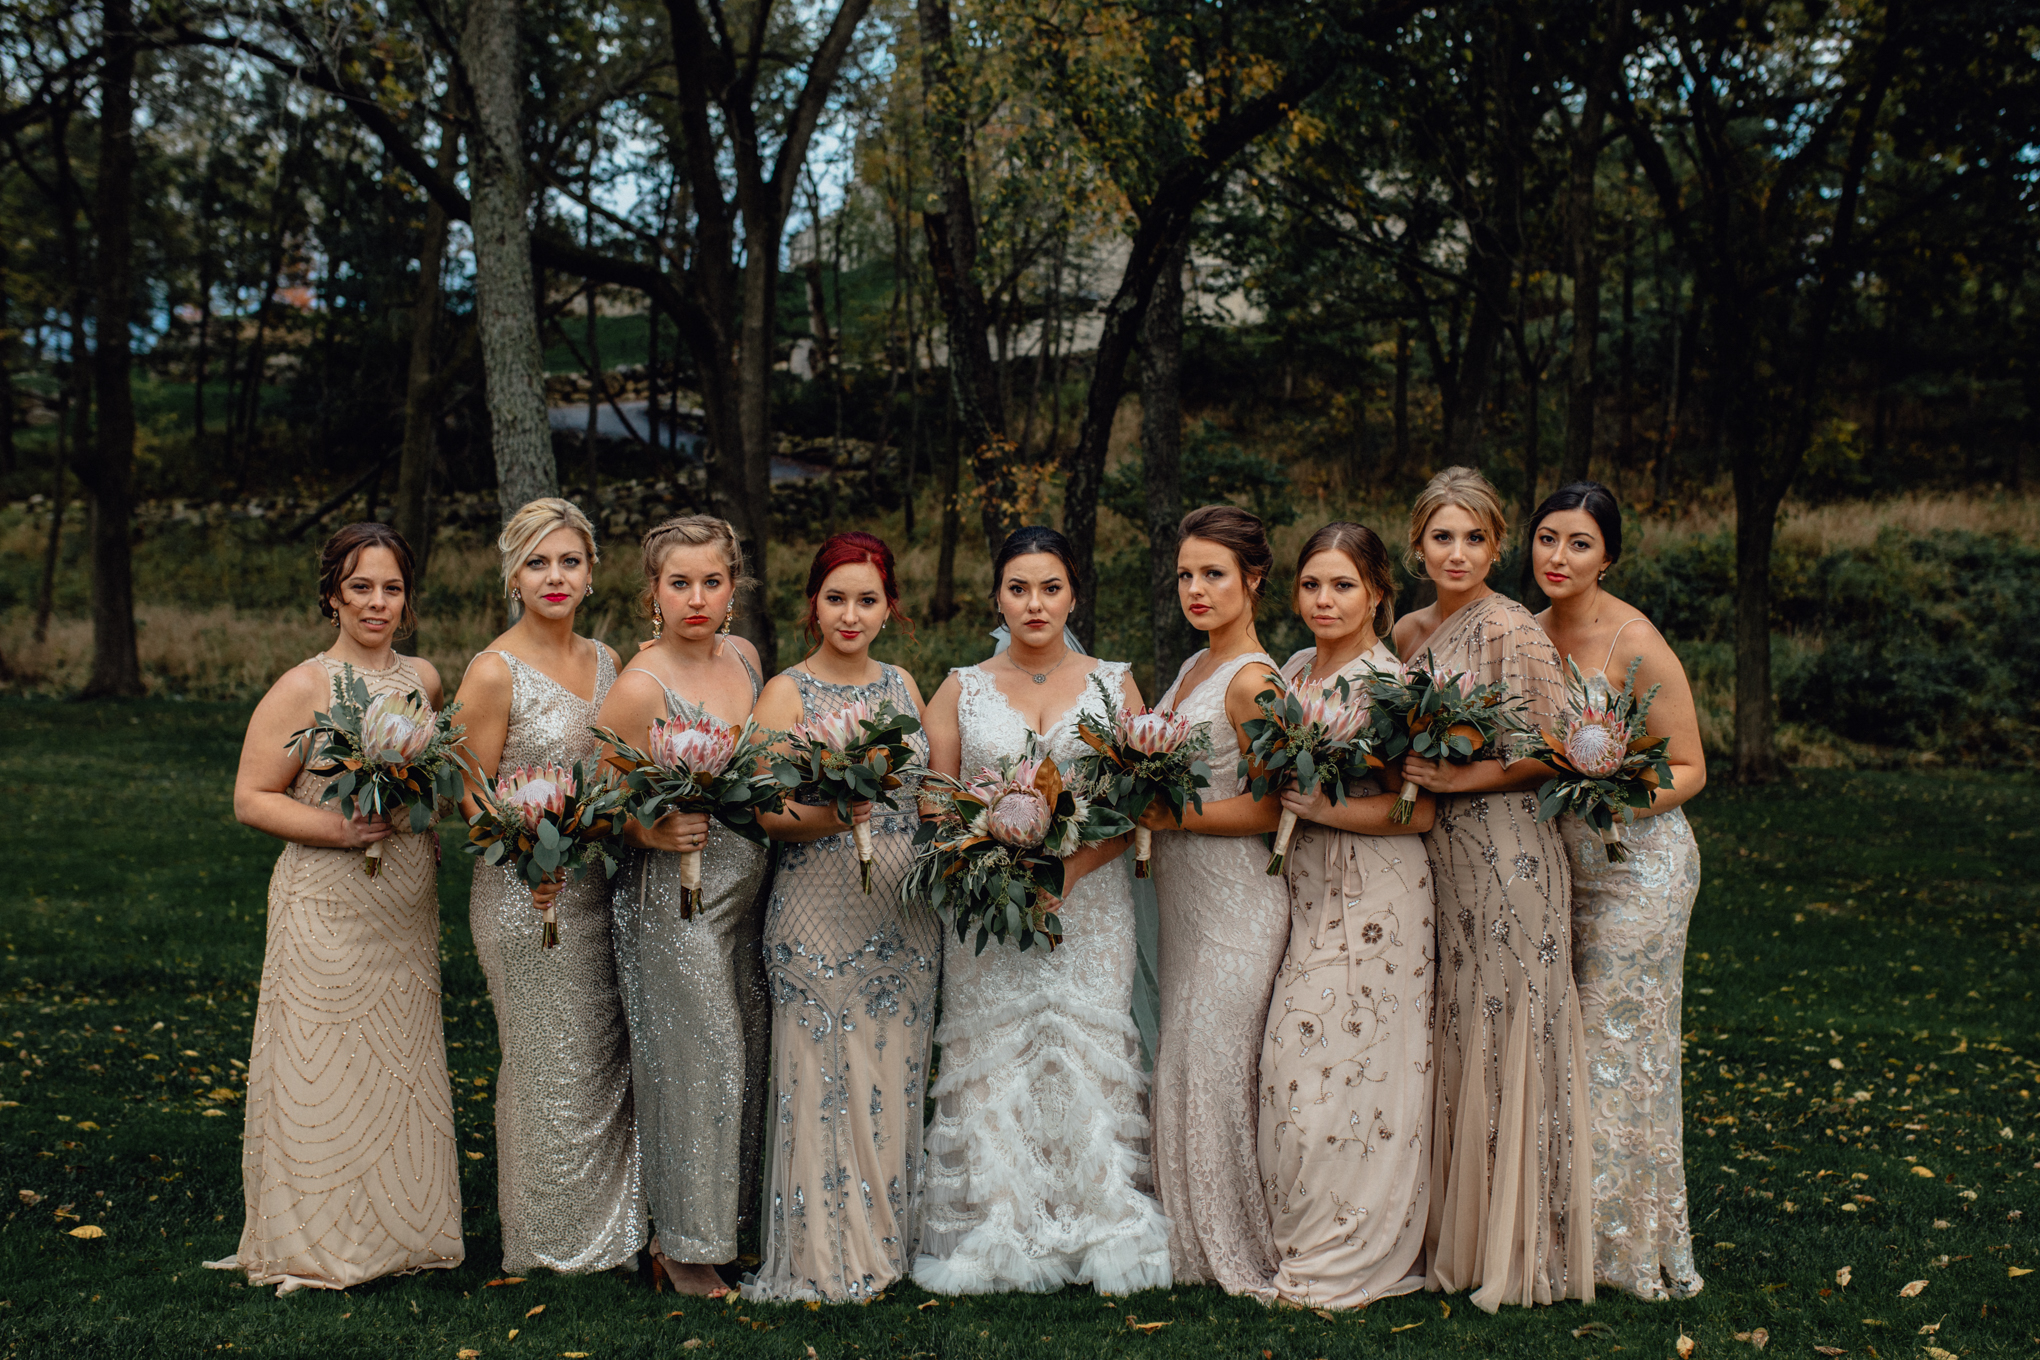  bridesmaids posing with bouquets in grass 